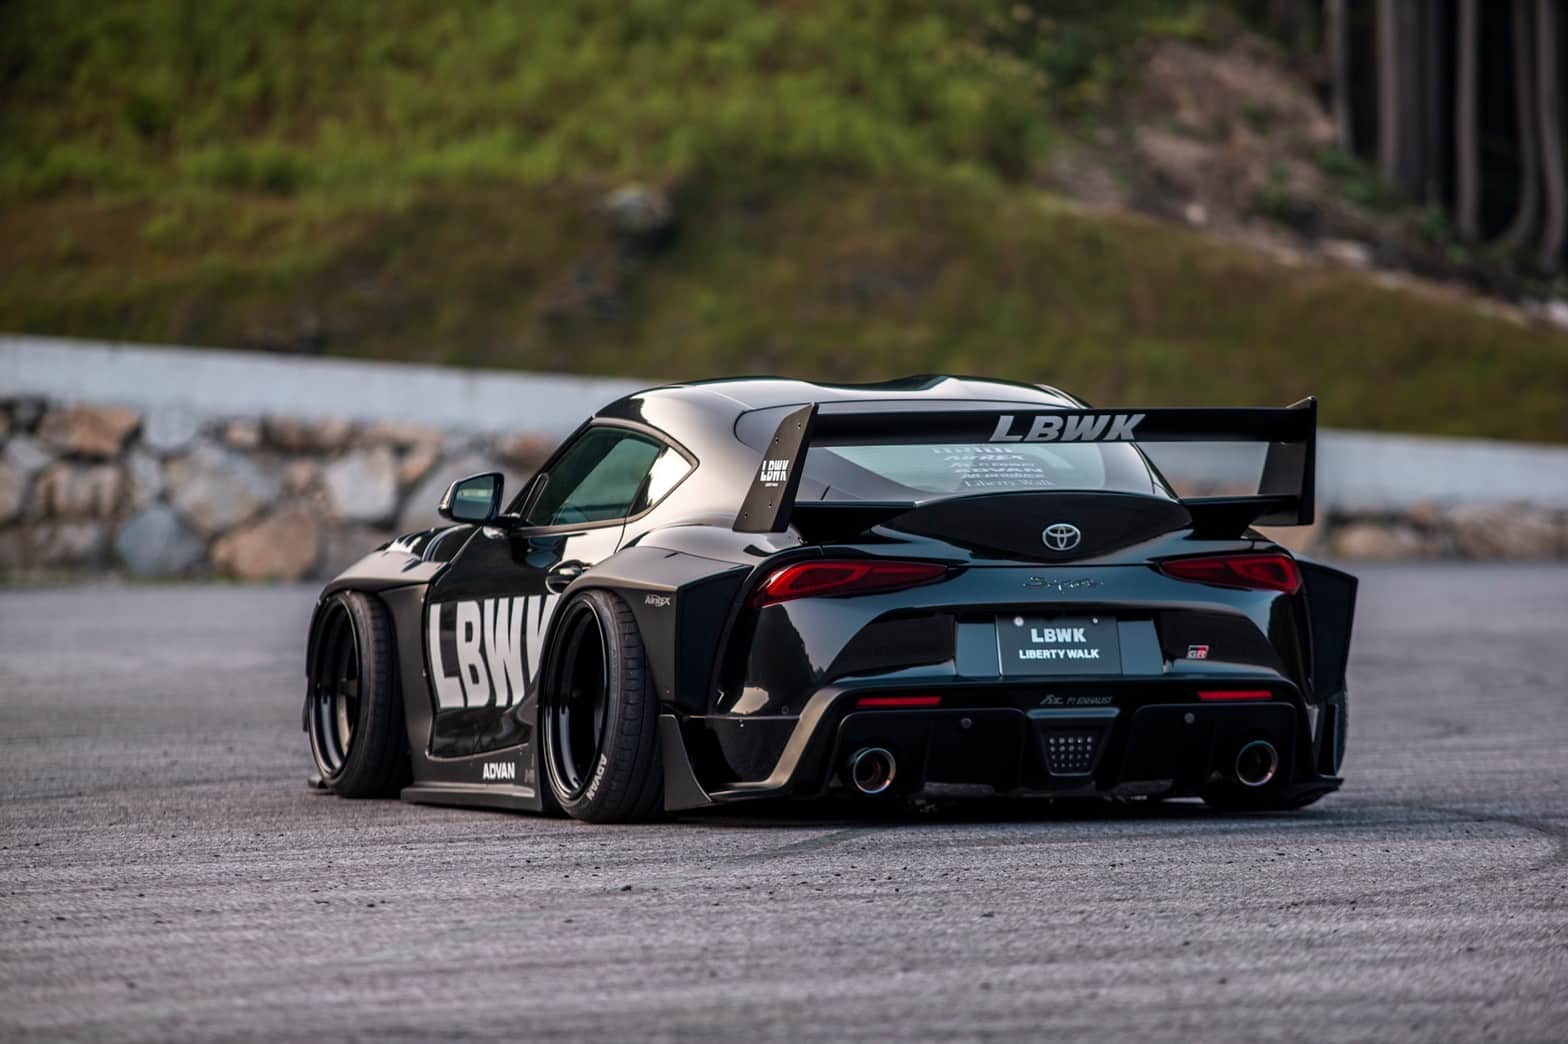 Liberty Walk returns with an extravagant proposal for the Toyota Supra